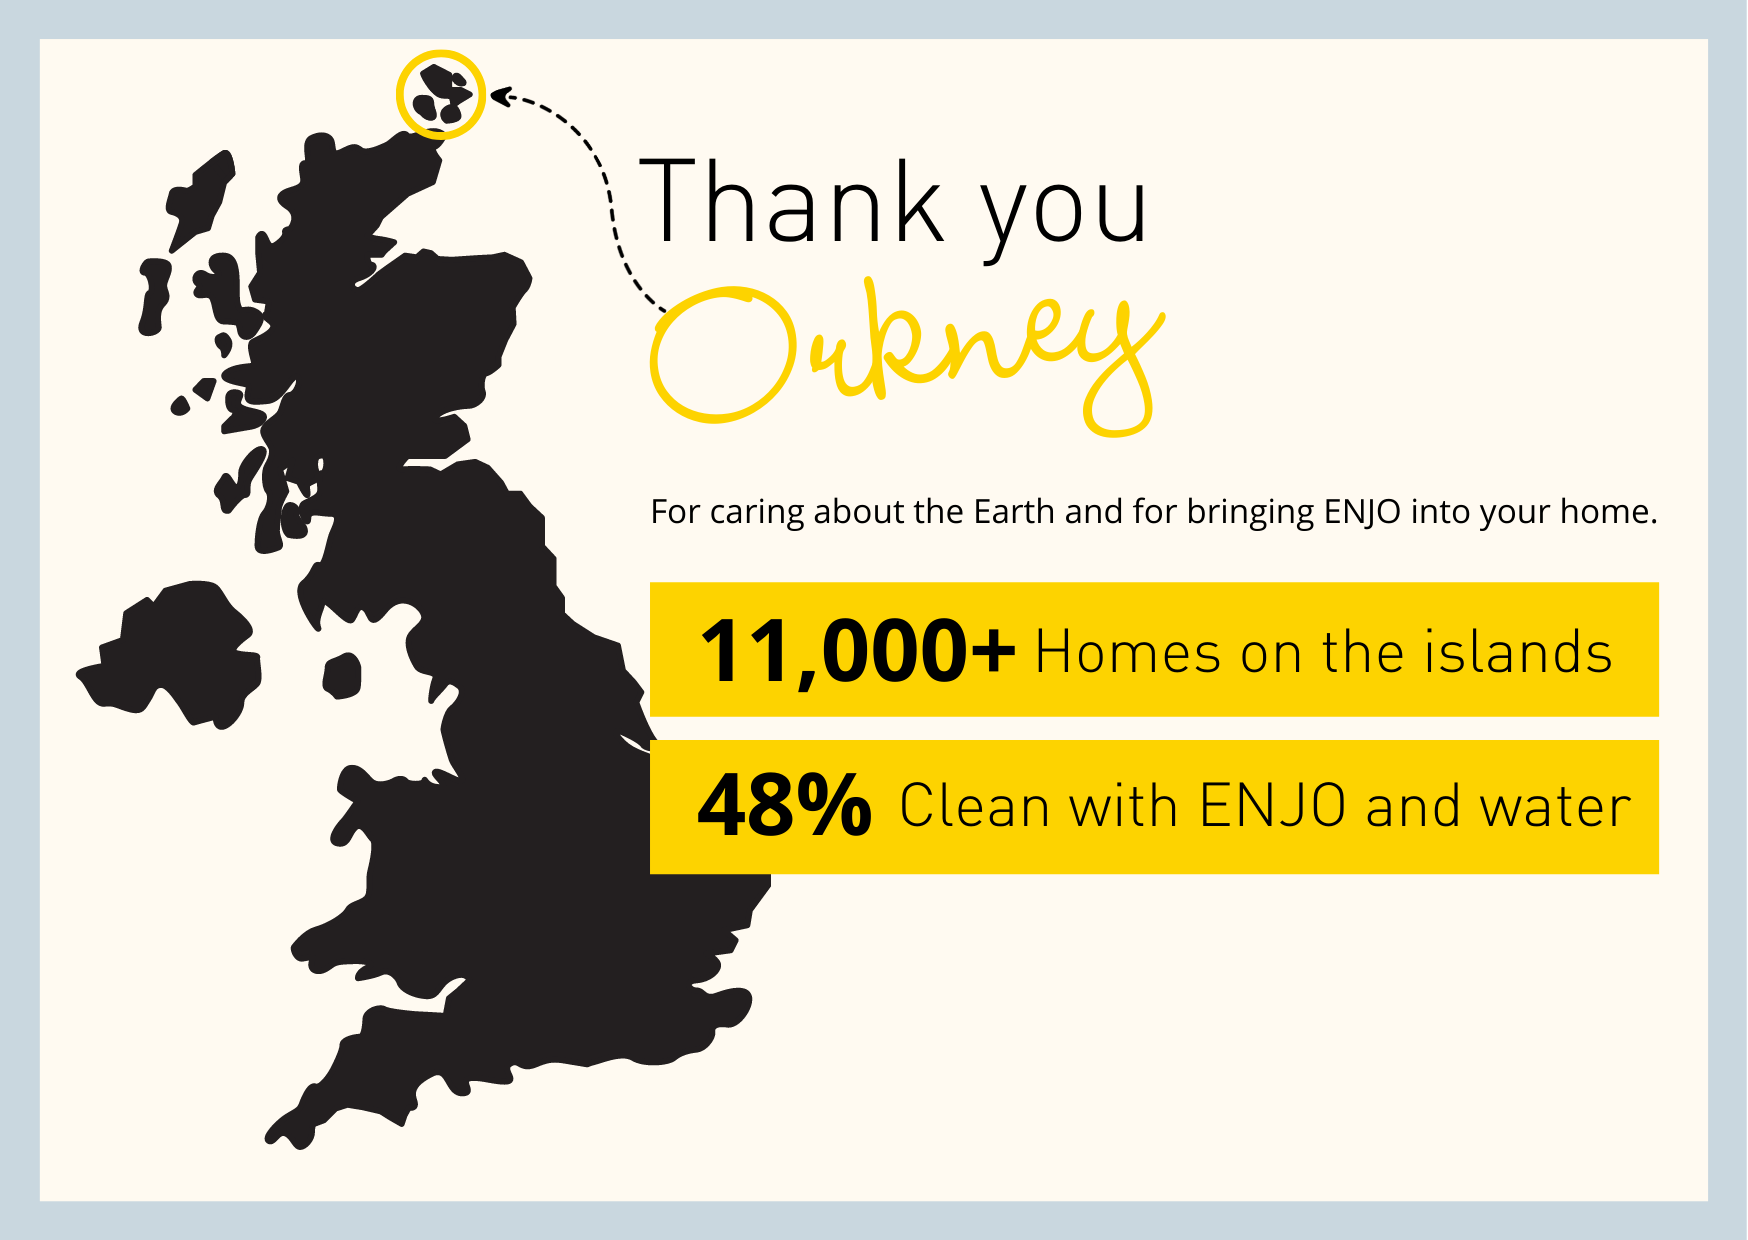 Stats reflecting how much ENJO is used in Orkney